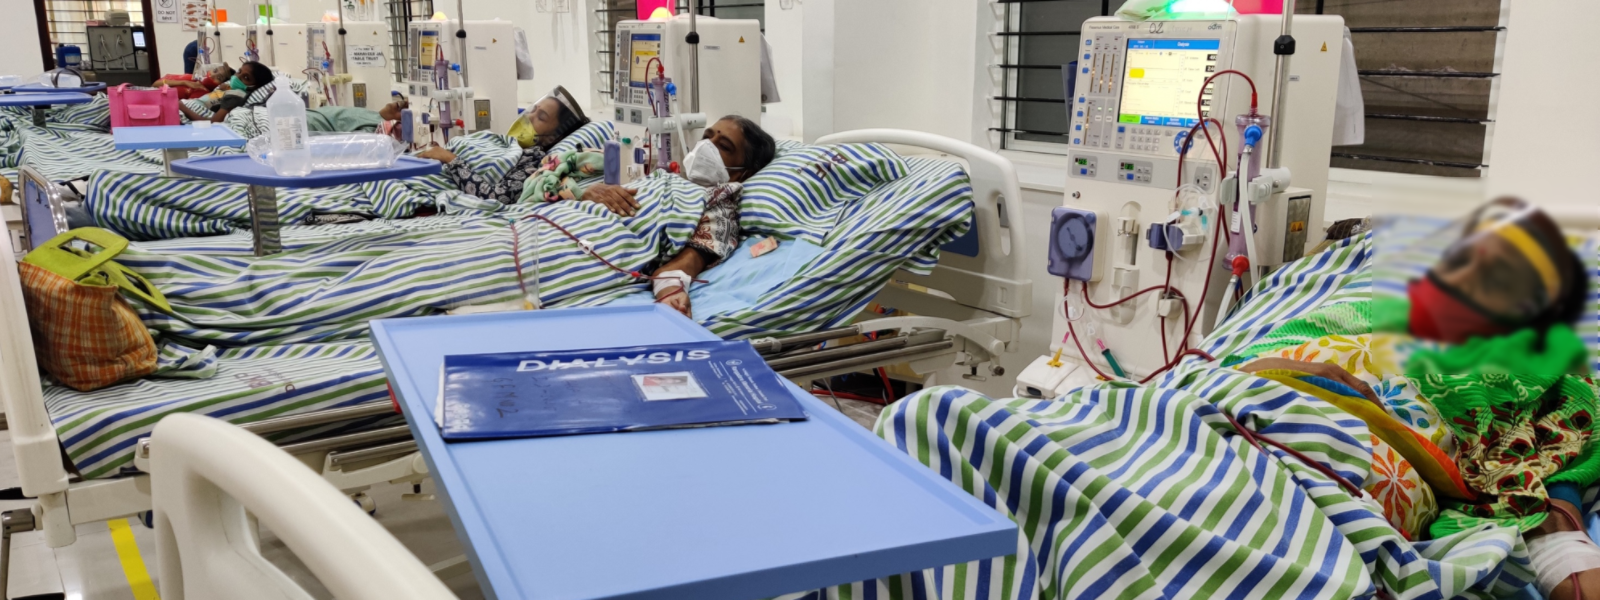 patients sleeping on their beds getting medical treatment